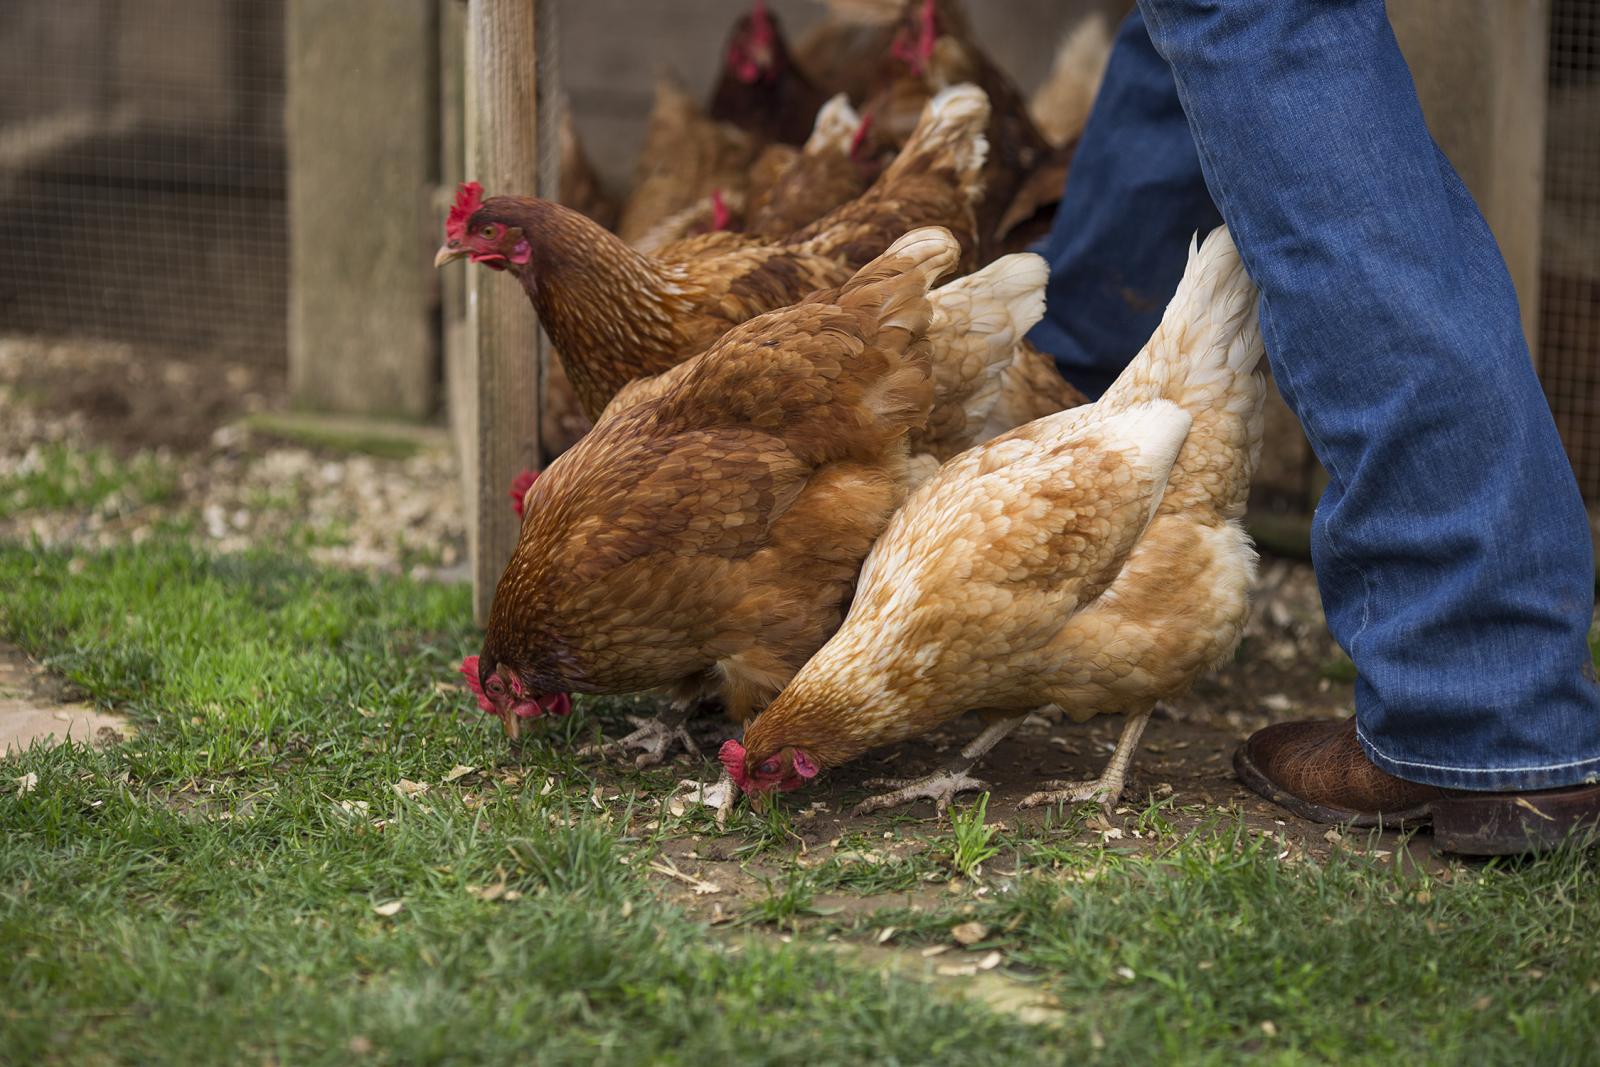 red chickens peck at the ground as a someone walks by wearing jeans and boots